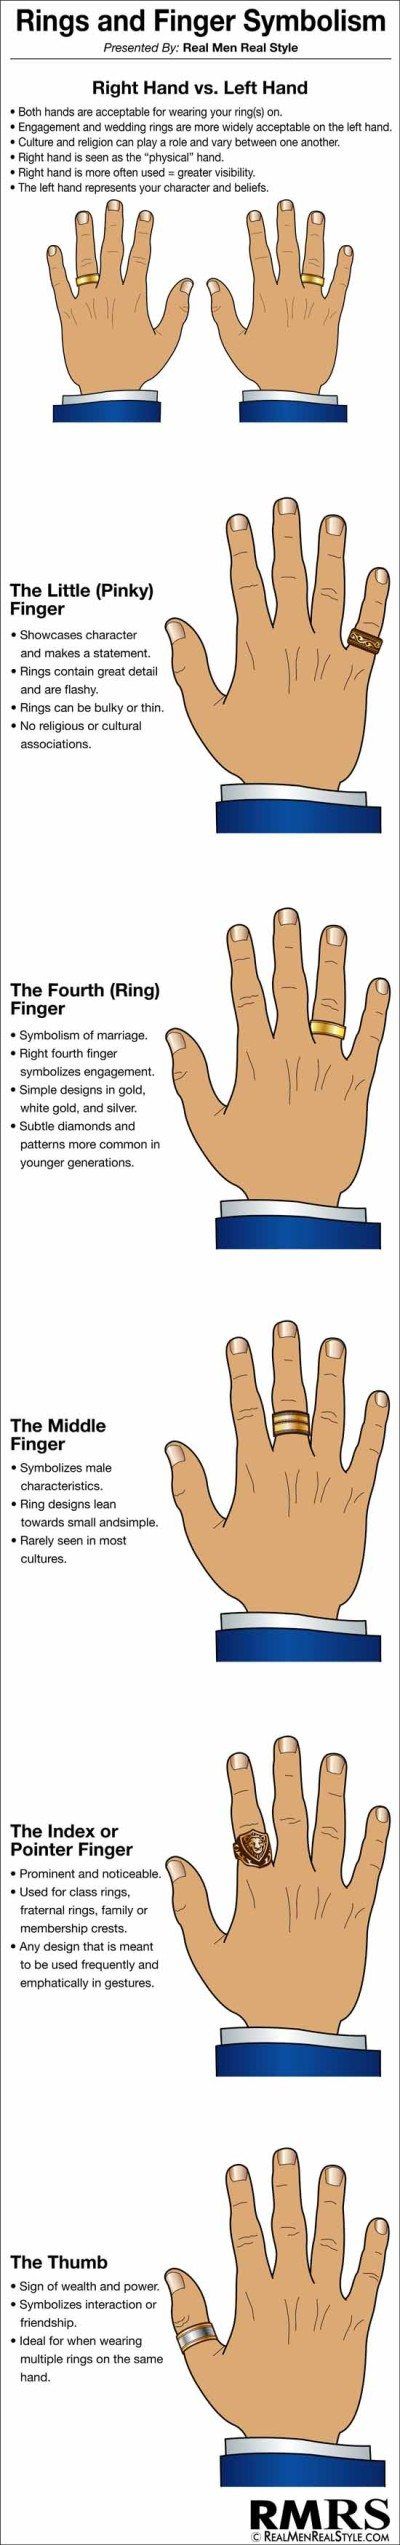 Rings-and-Finger-Symbolism-Infographic-550